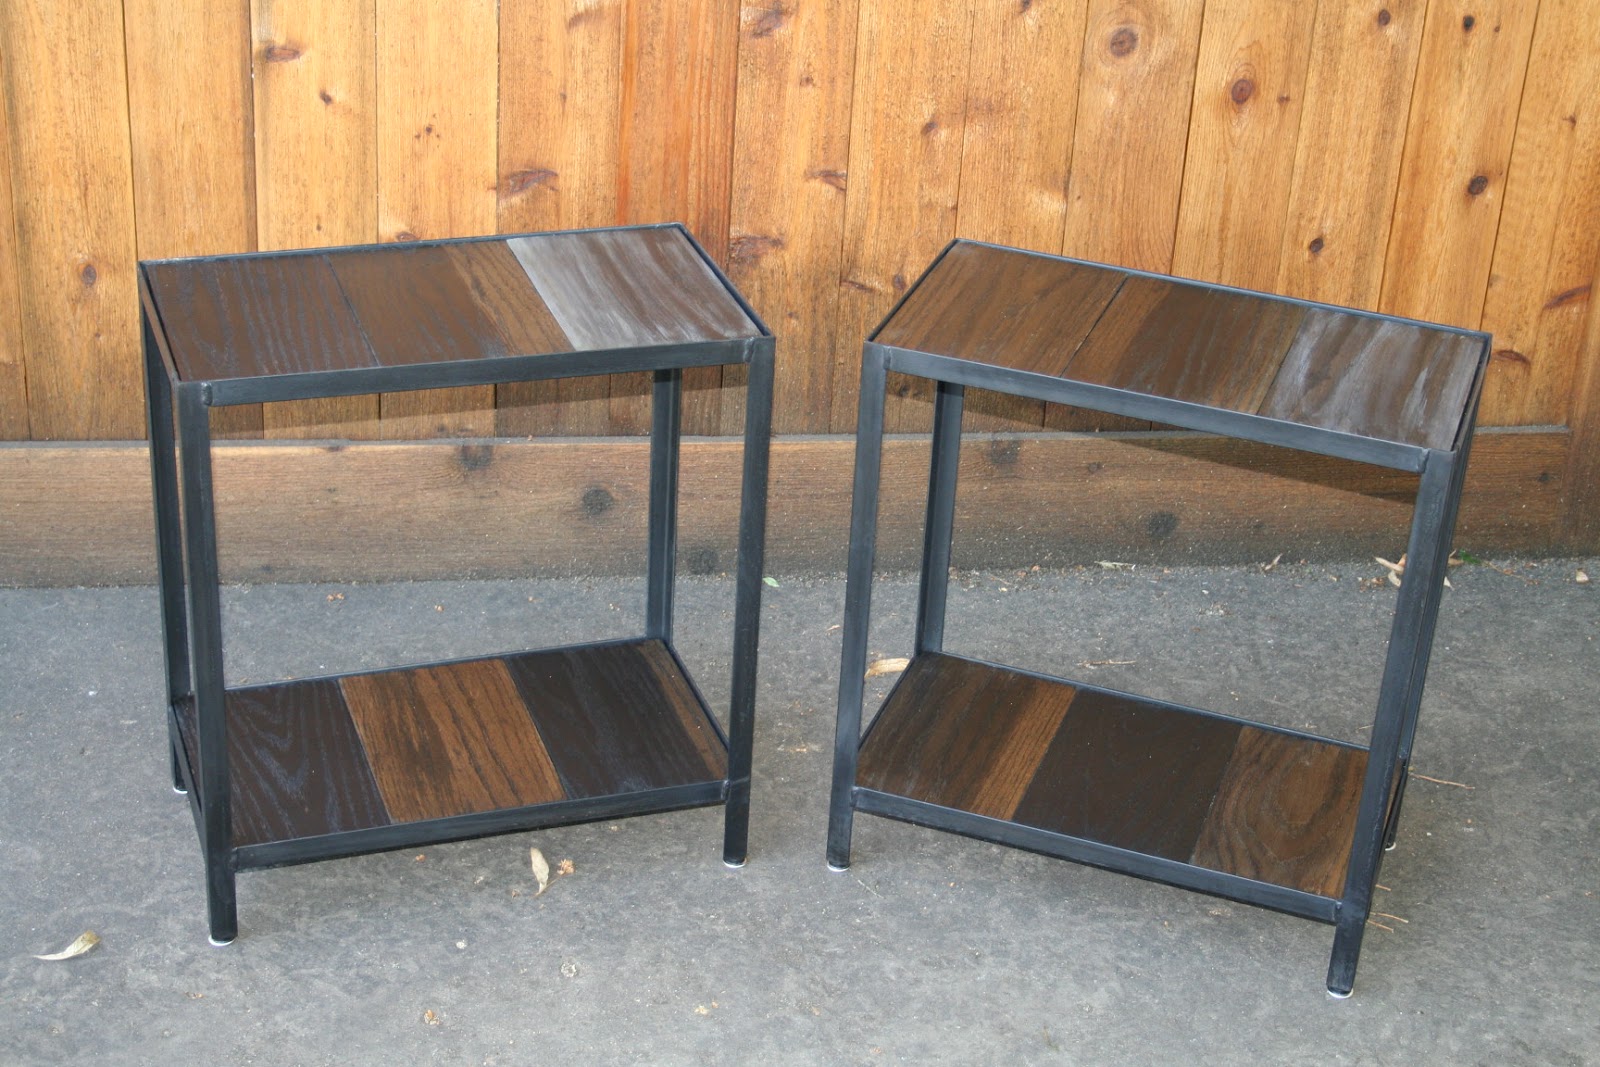  Real  Industrial Edge Furniture llc Industrial end table 